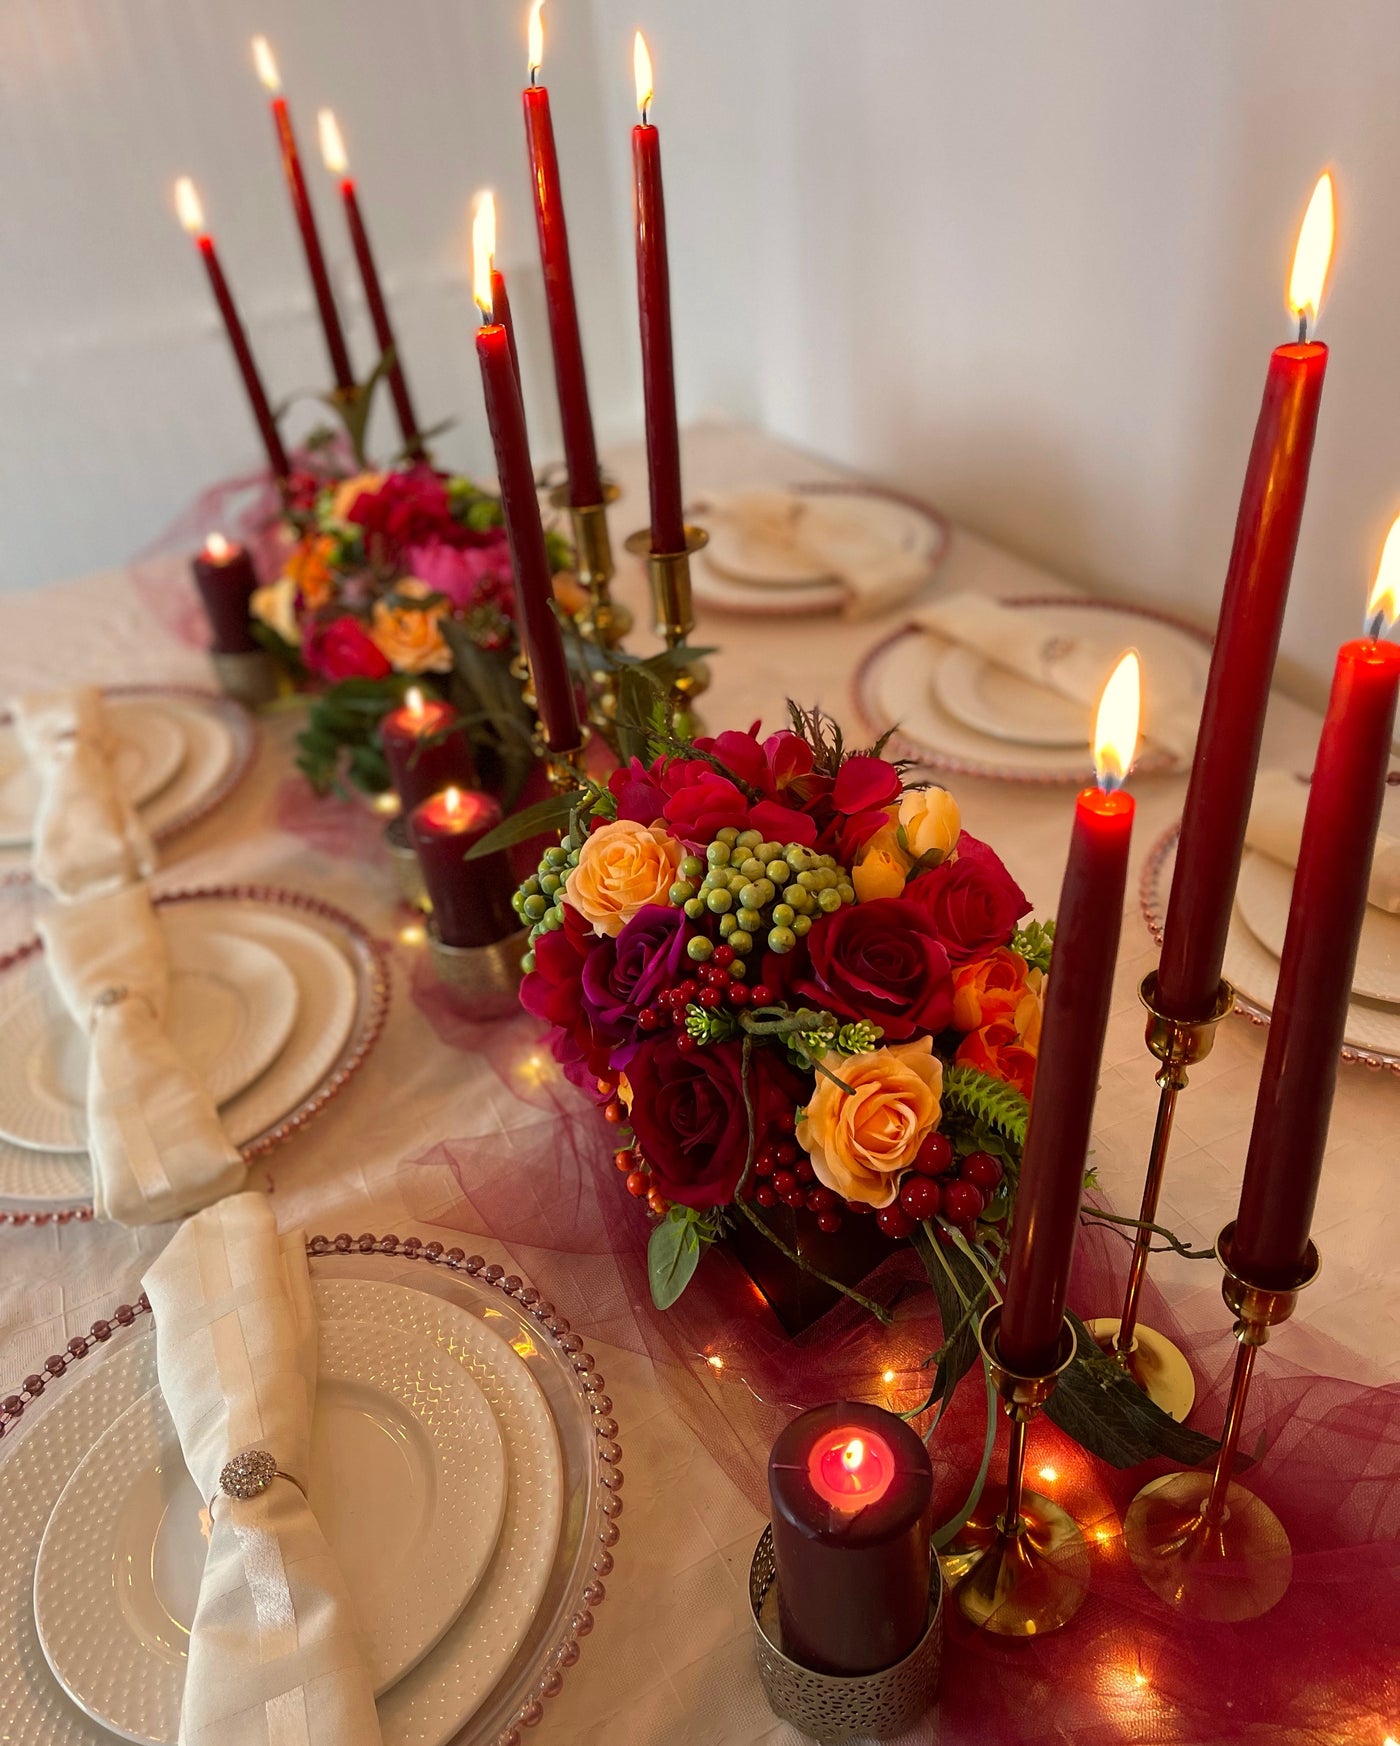 Rent a Rose- Centrepiece- Orange, Burgundy, and Fuchsia- flowers with Olive green berries rent for five days for $20.00